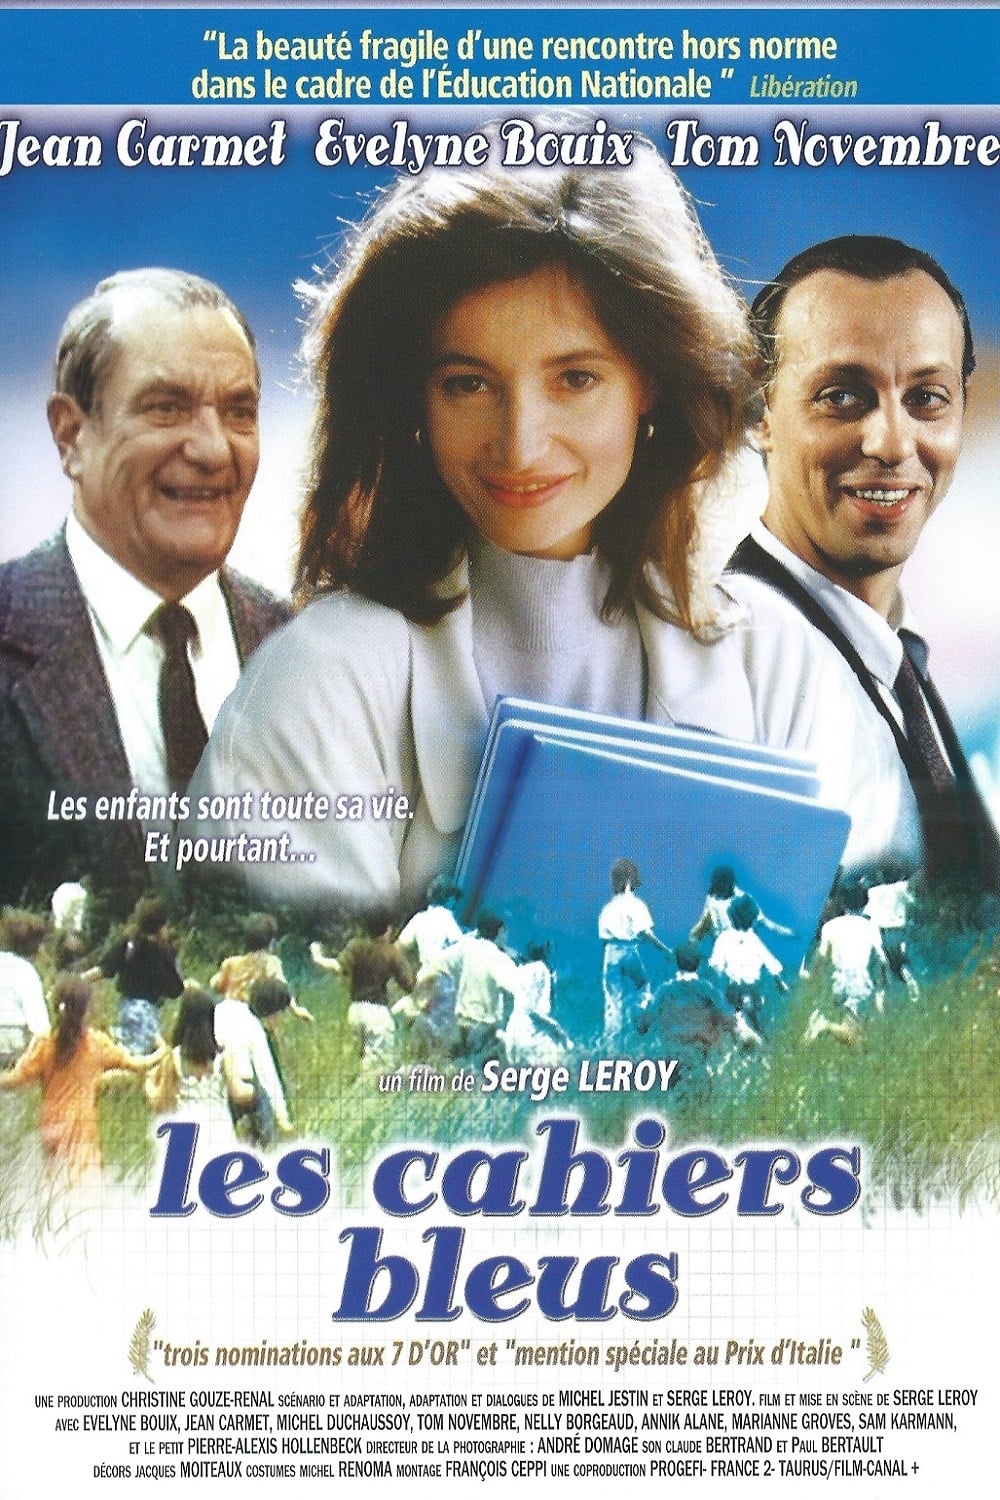 A Lesson of hope (1991)